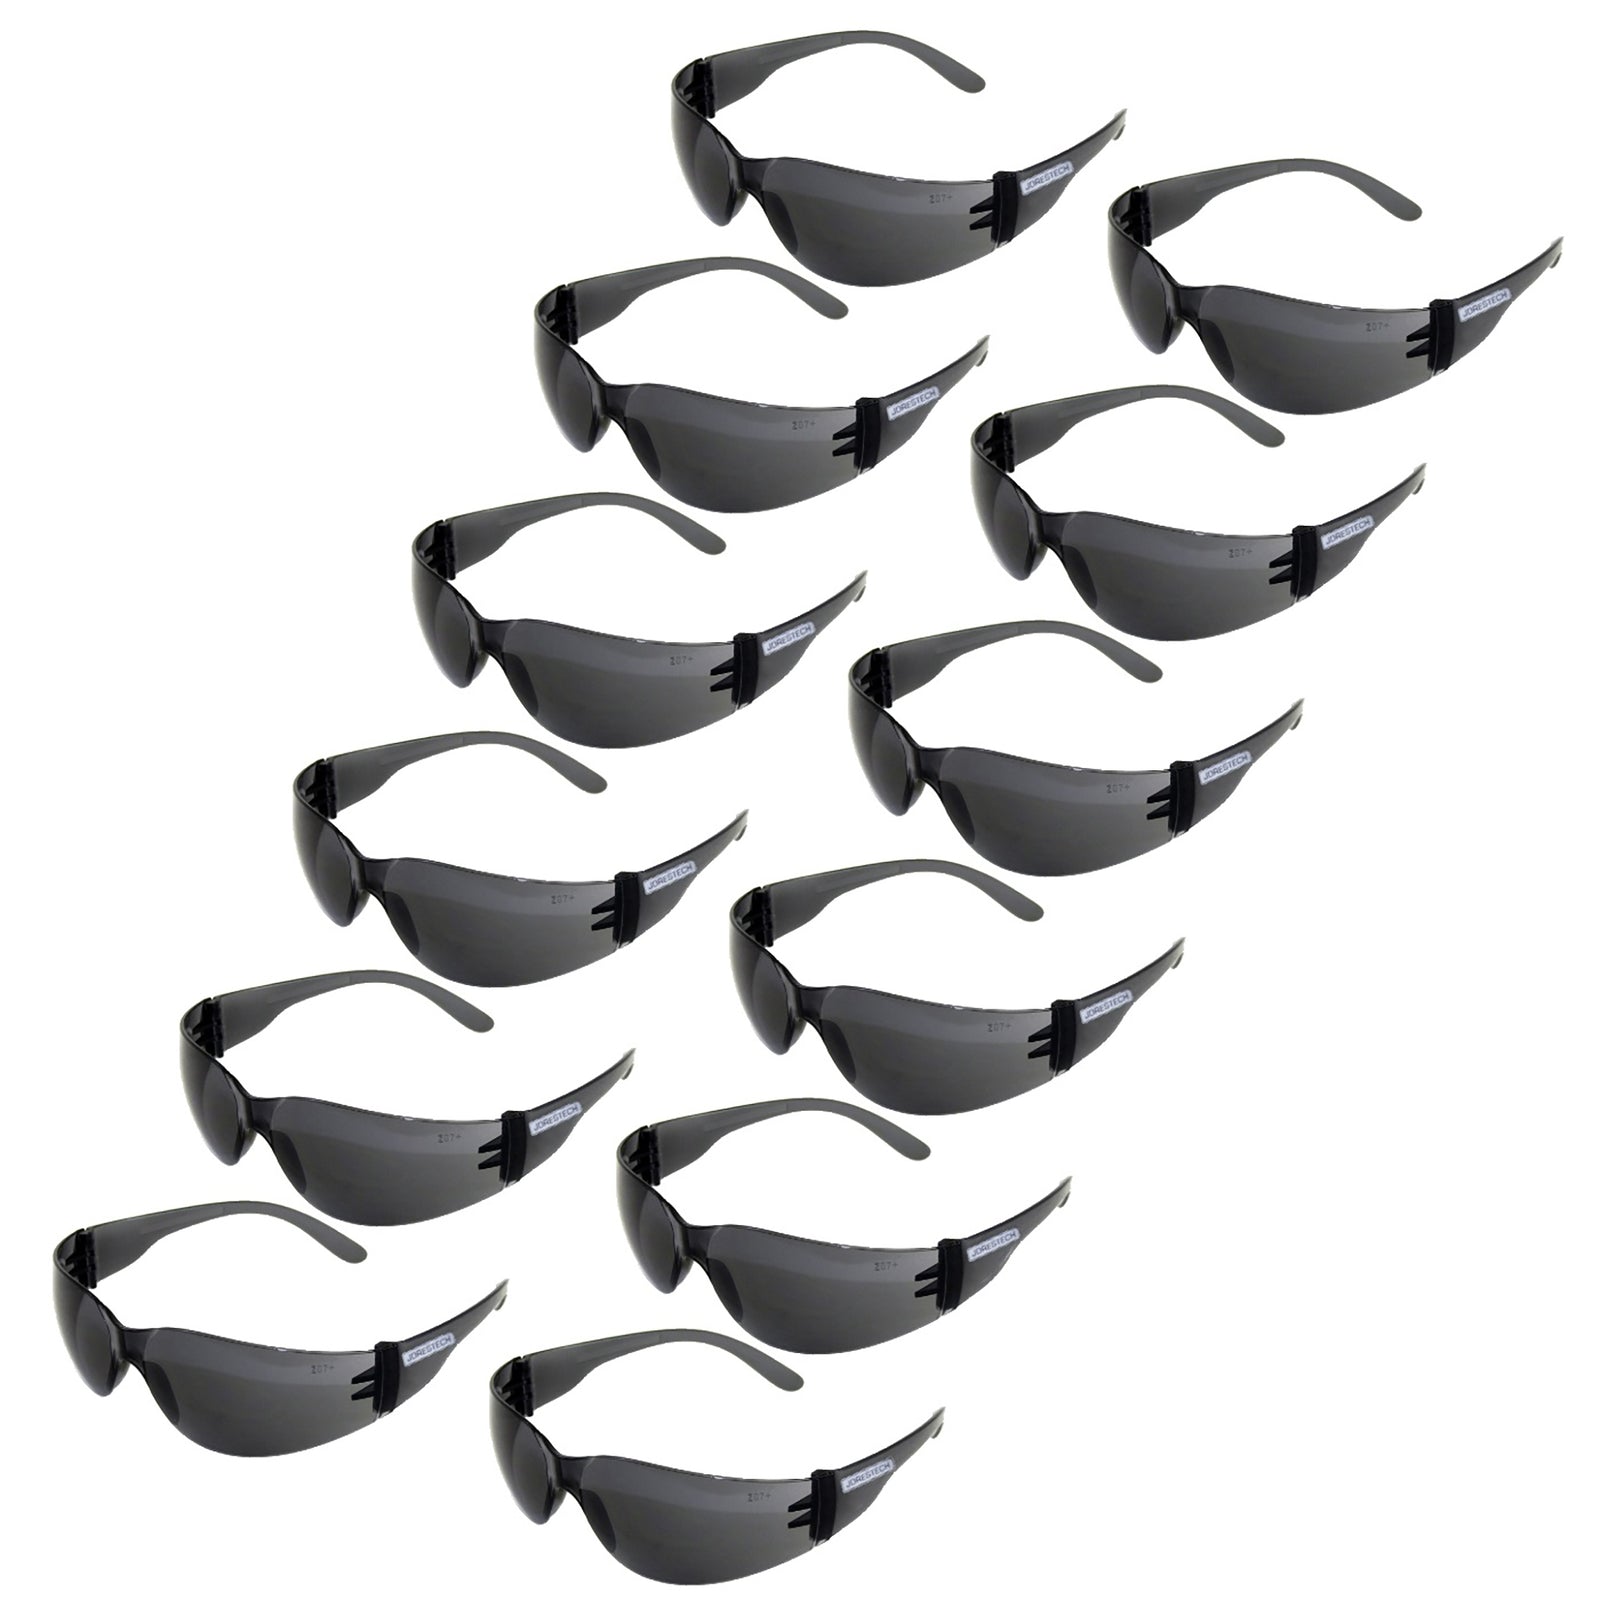 Set of 12 smoke JORESTECH Safety High Impact Glasses over white background